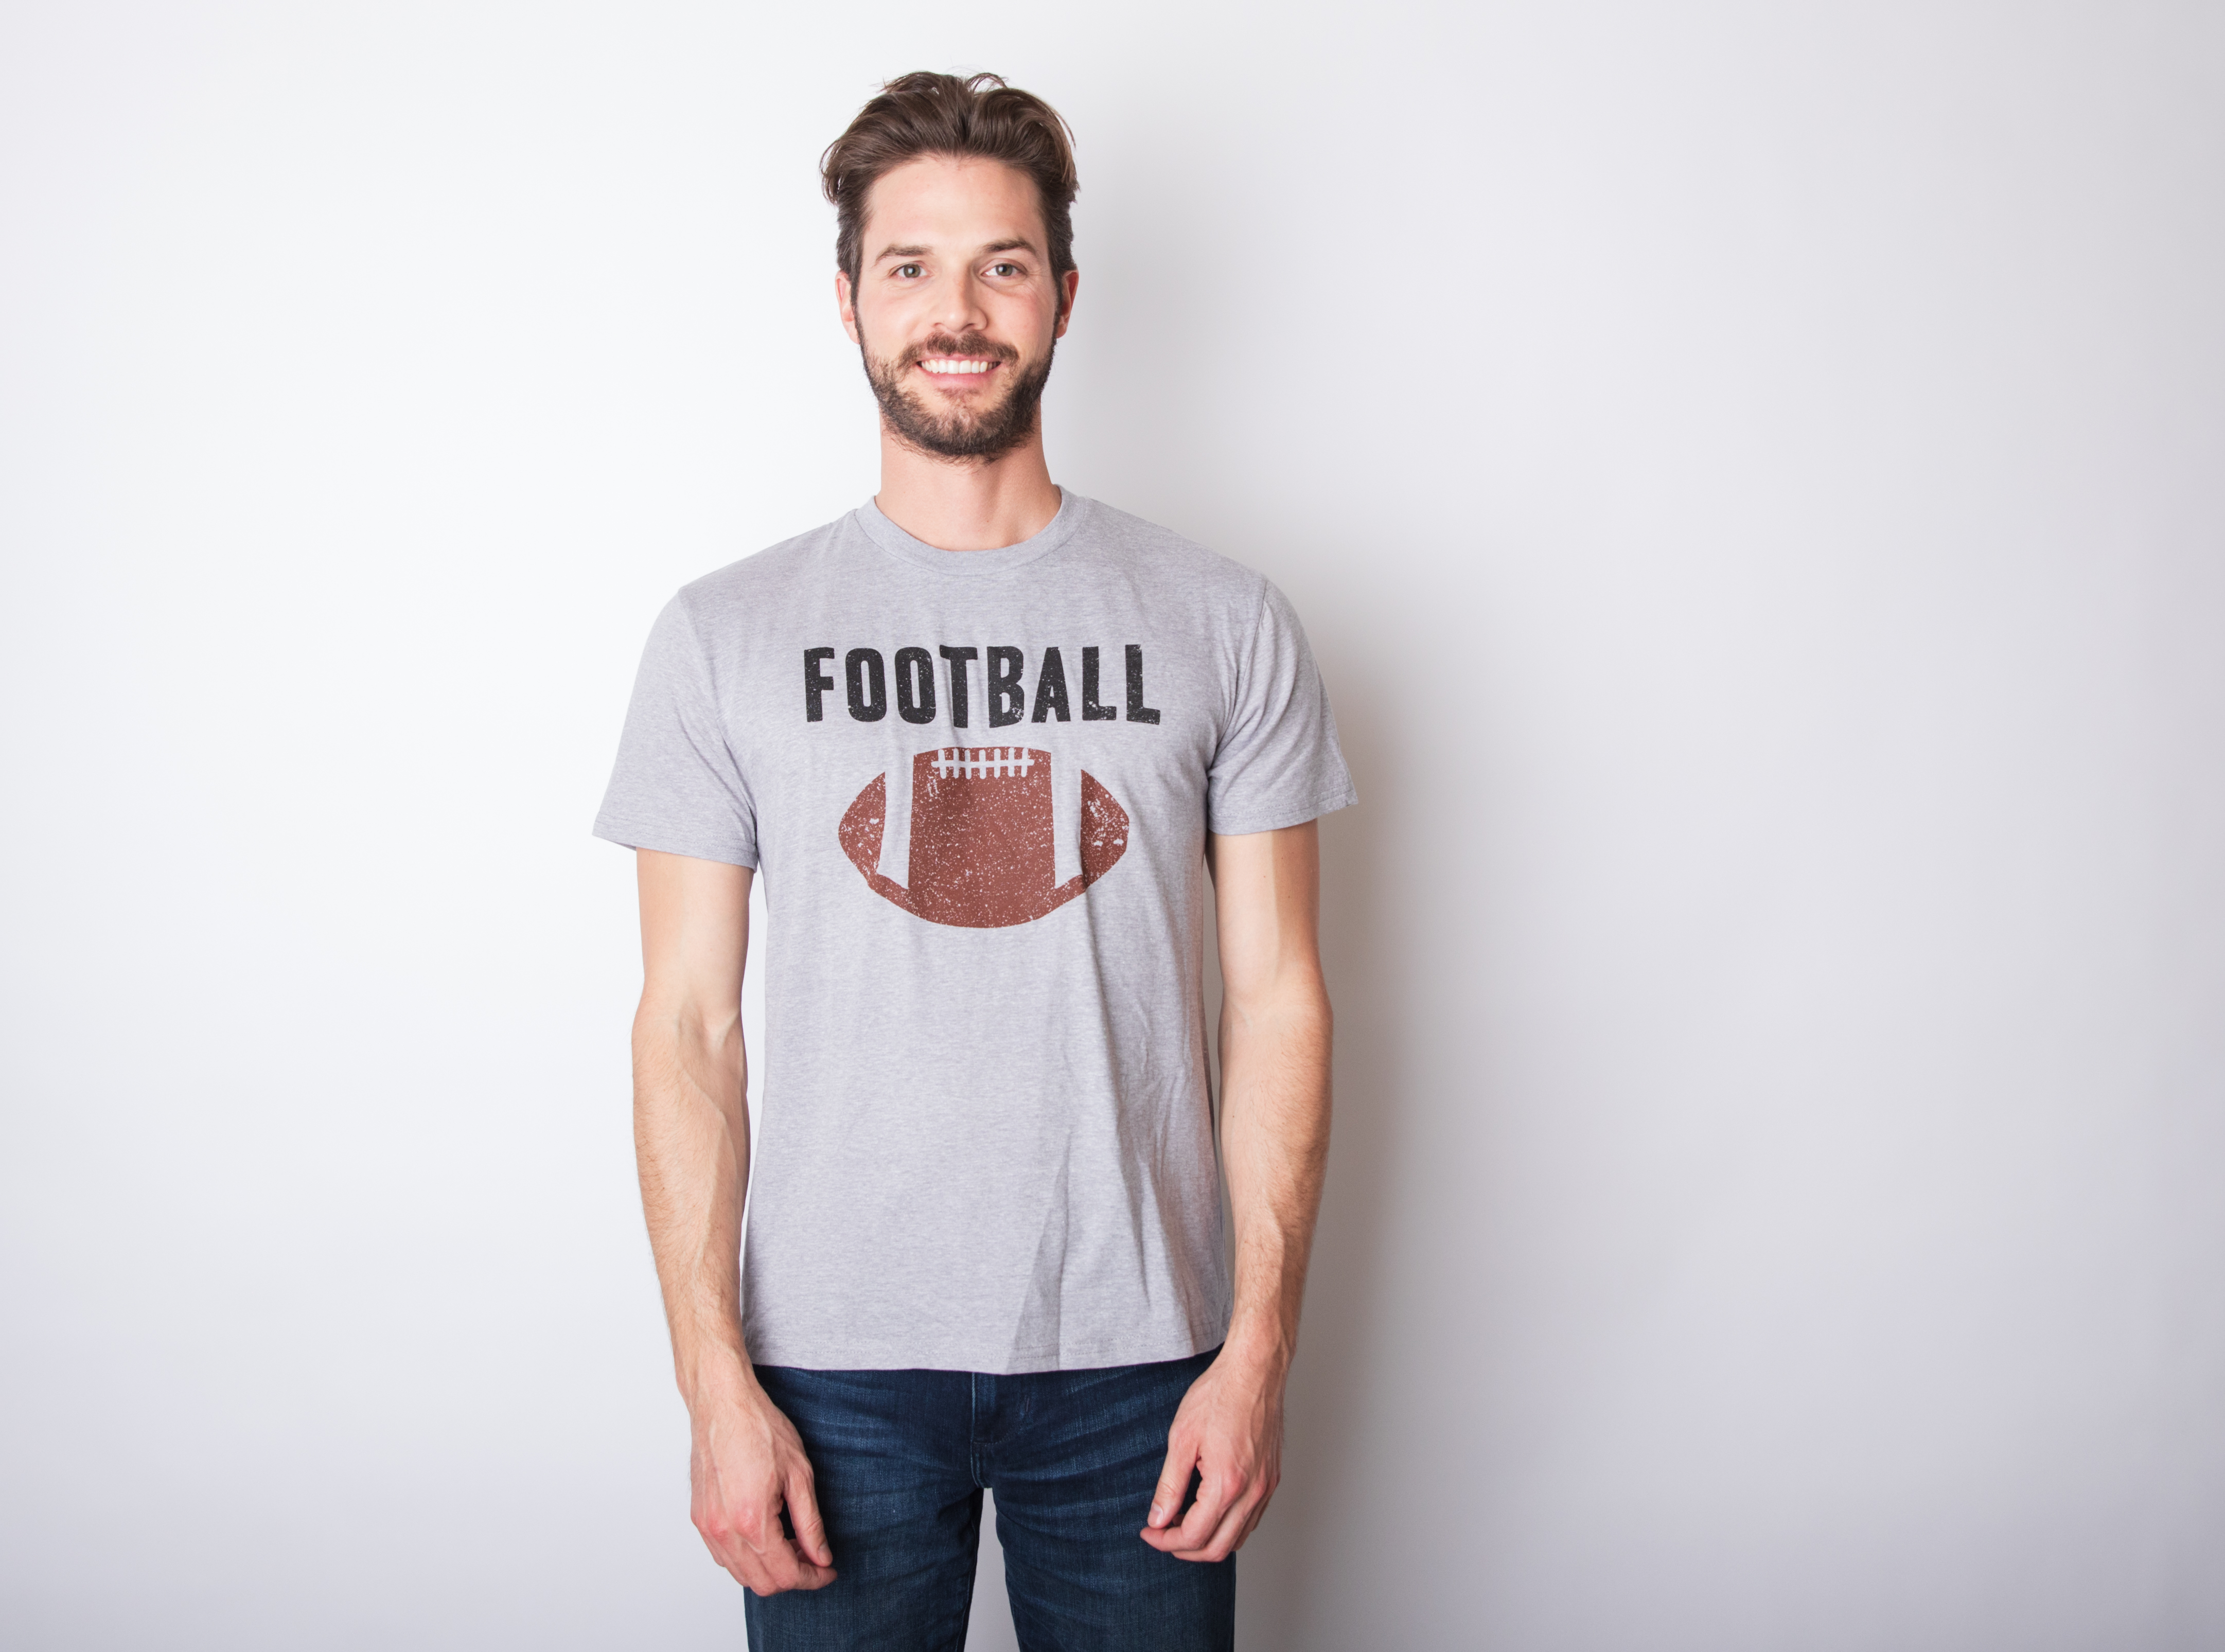 Mens Vintage Football Fantasy Game Day Gift Funny Vintage Graphic Tee for Dad Graphic Tees - image 2 of 9